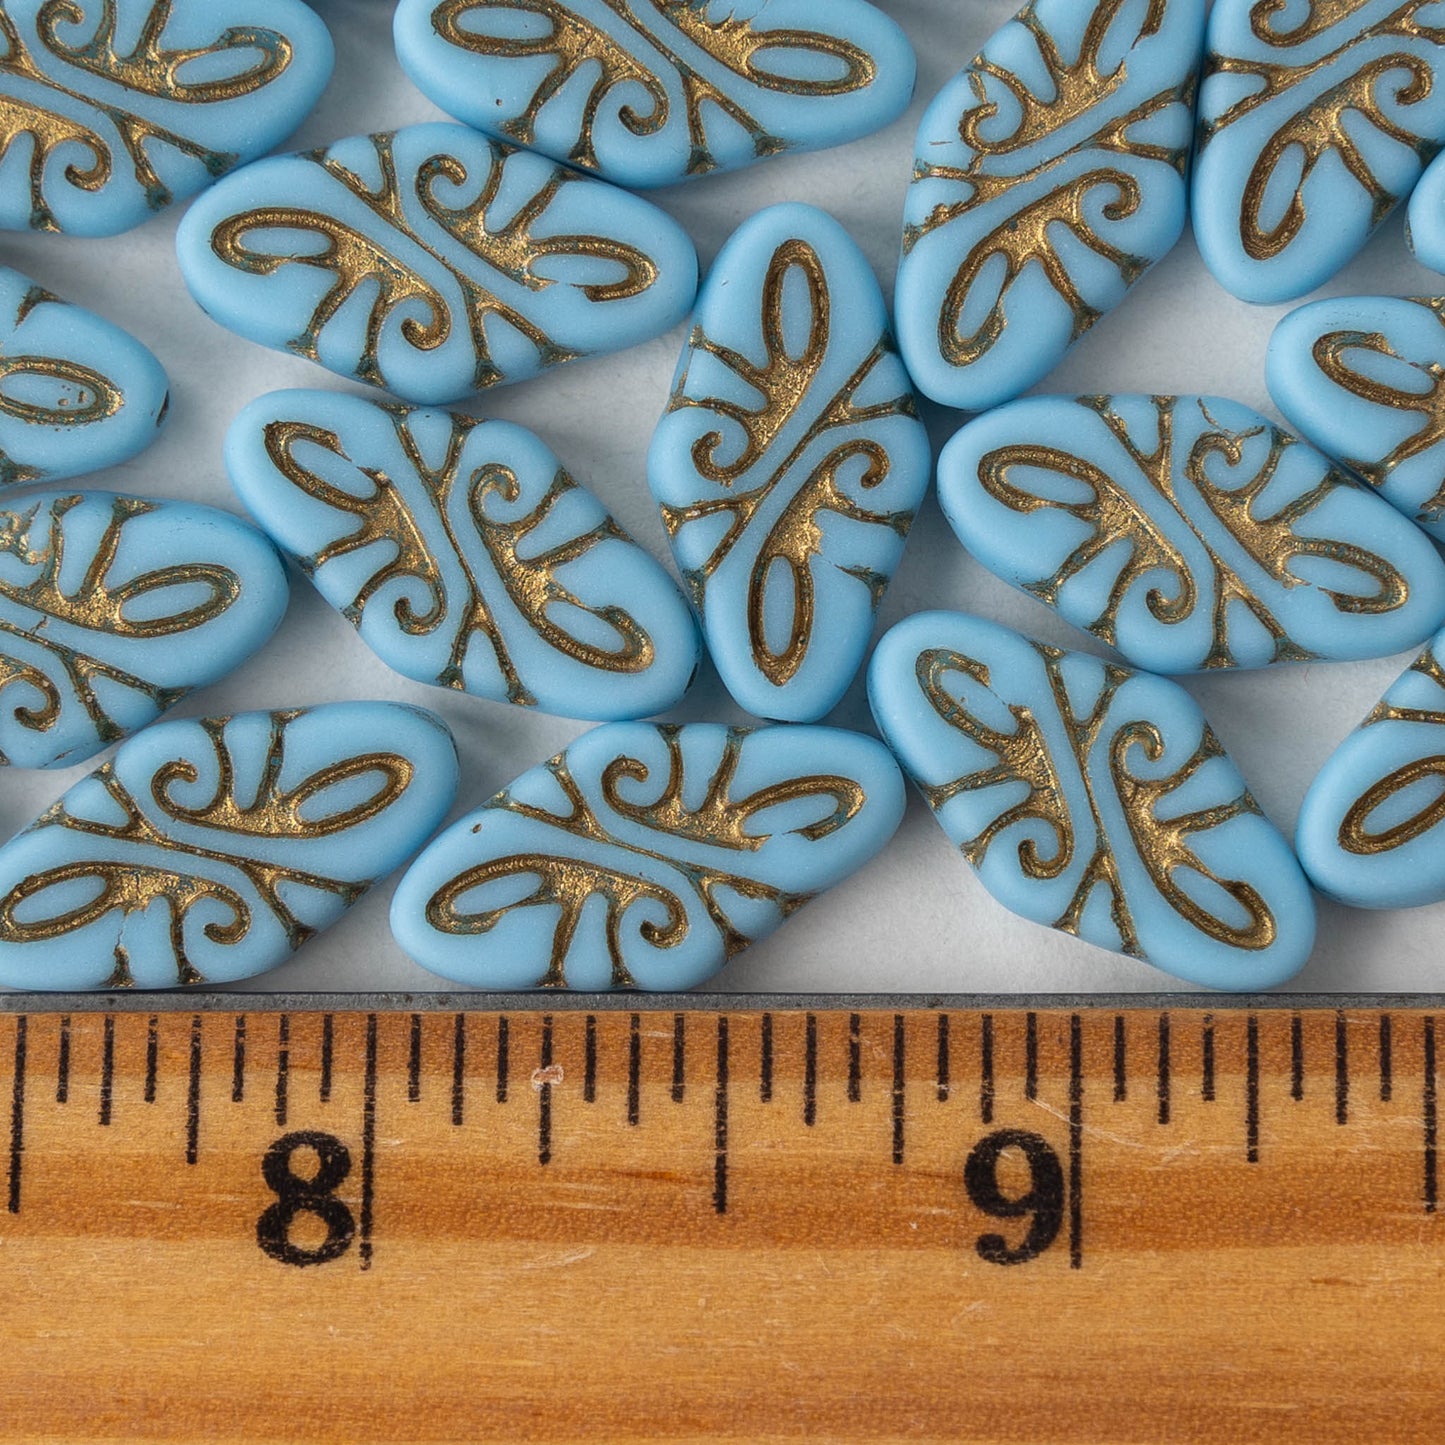 Oval Arabesque Beads - Blue Matte with Gold Wash - 10 beads